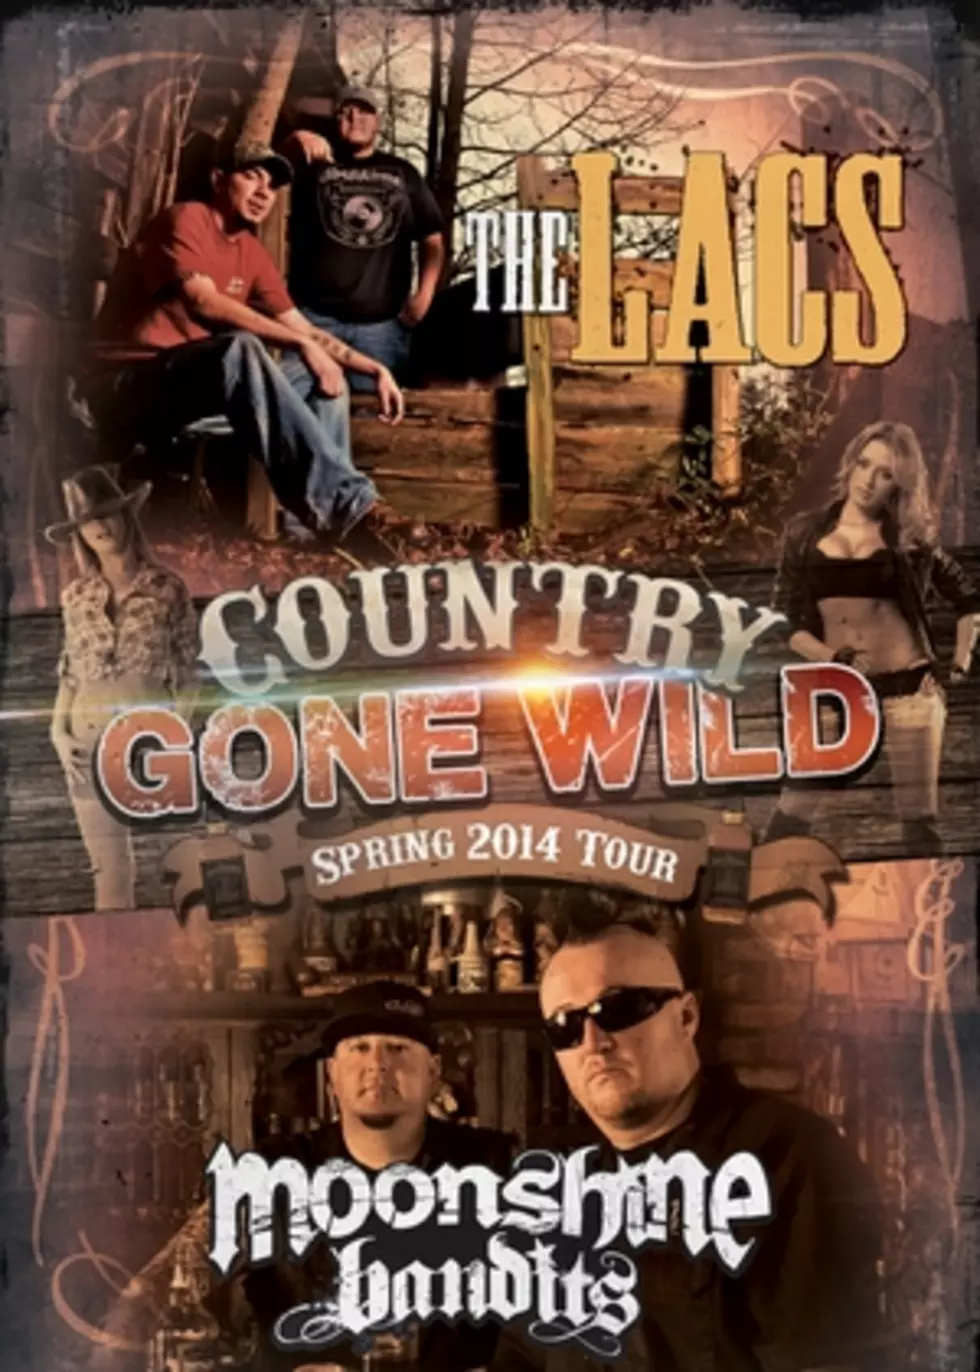 Moonshine Bandits and the LACS Team Up for 2014 Tour, New Video